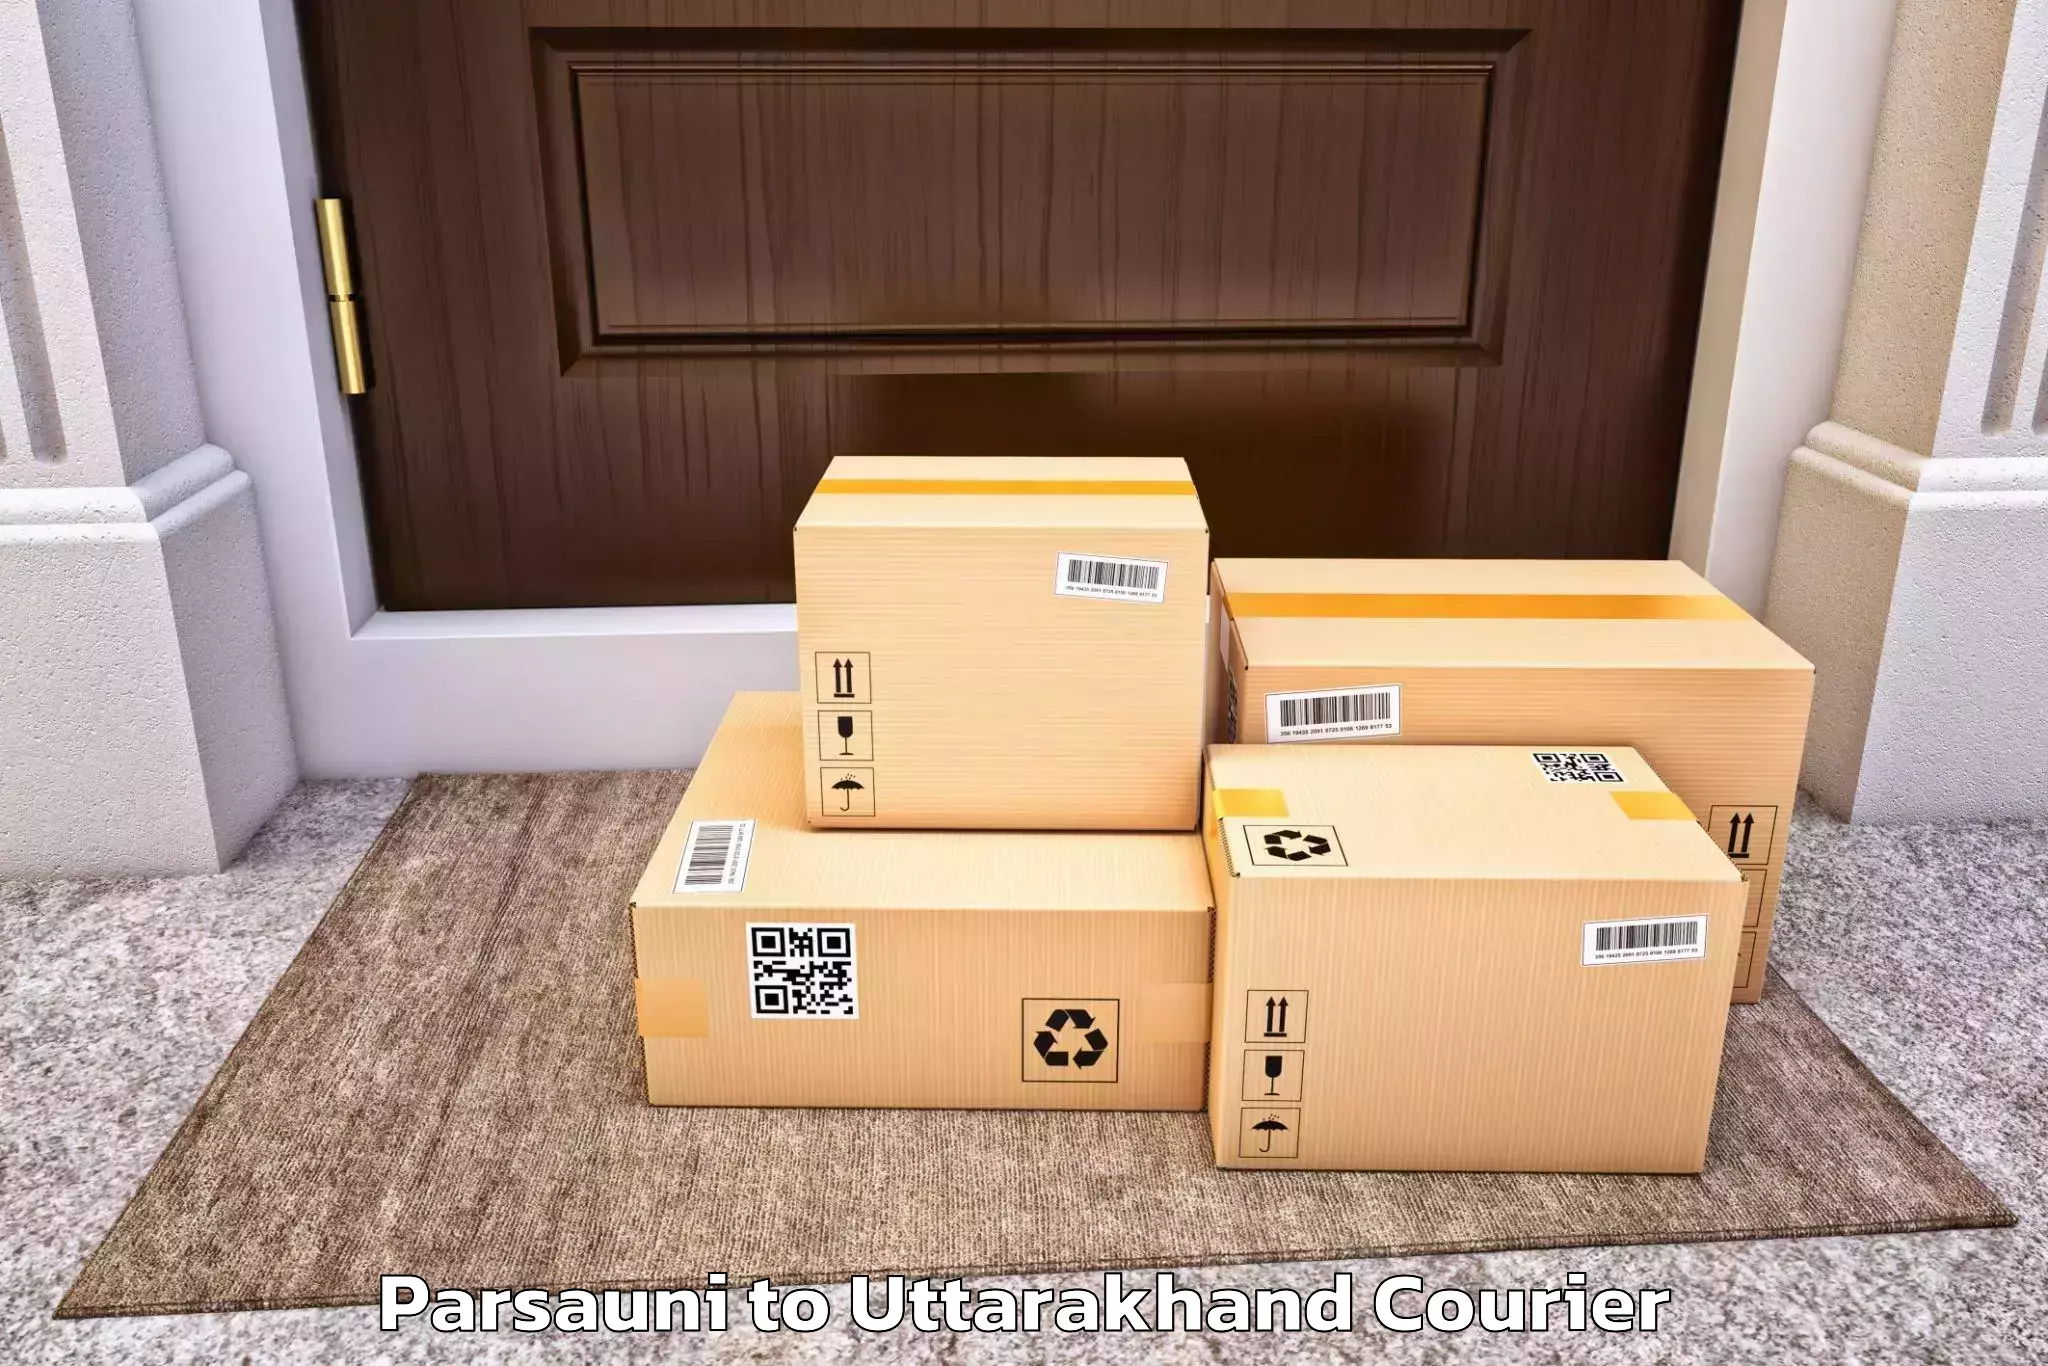 Quality furniture shipping Parsauni to Mussoorie